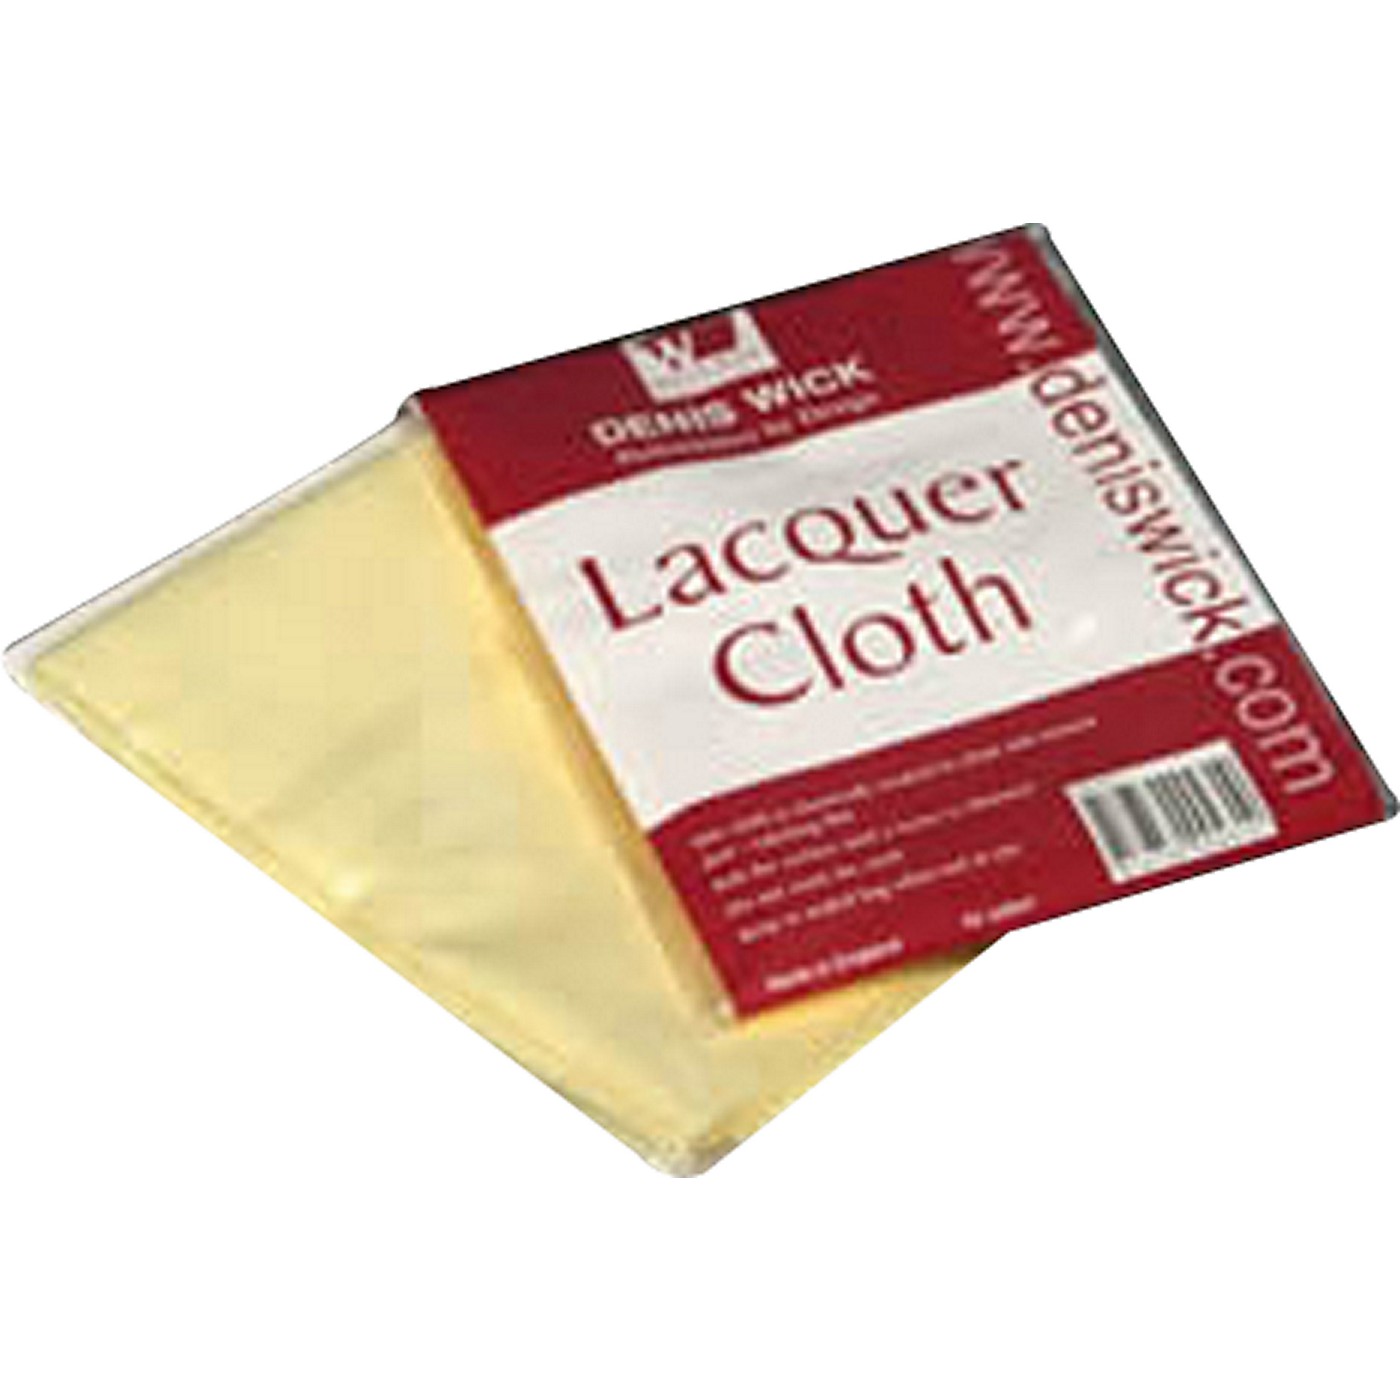 Denis Wick Lacquer Cleaning Cloth thumbnail